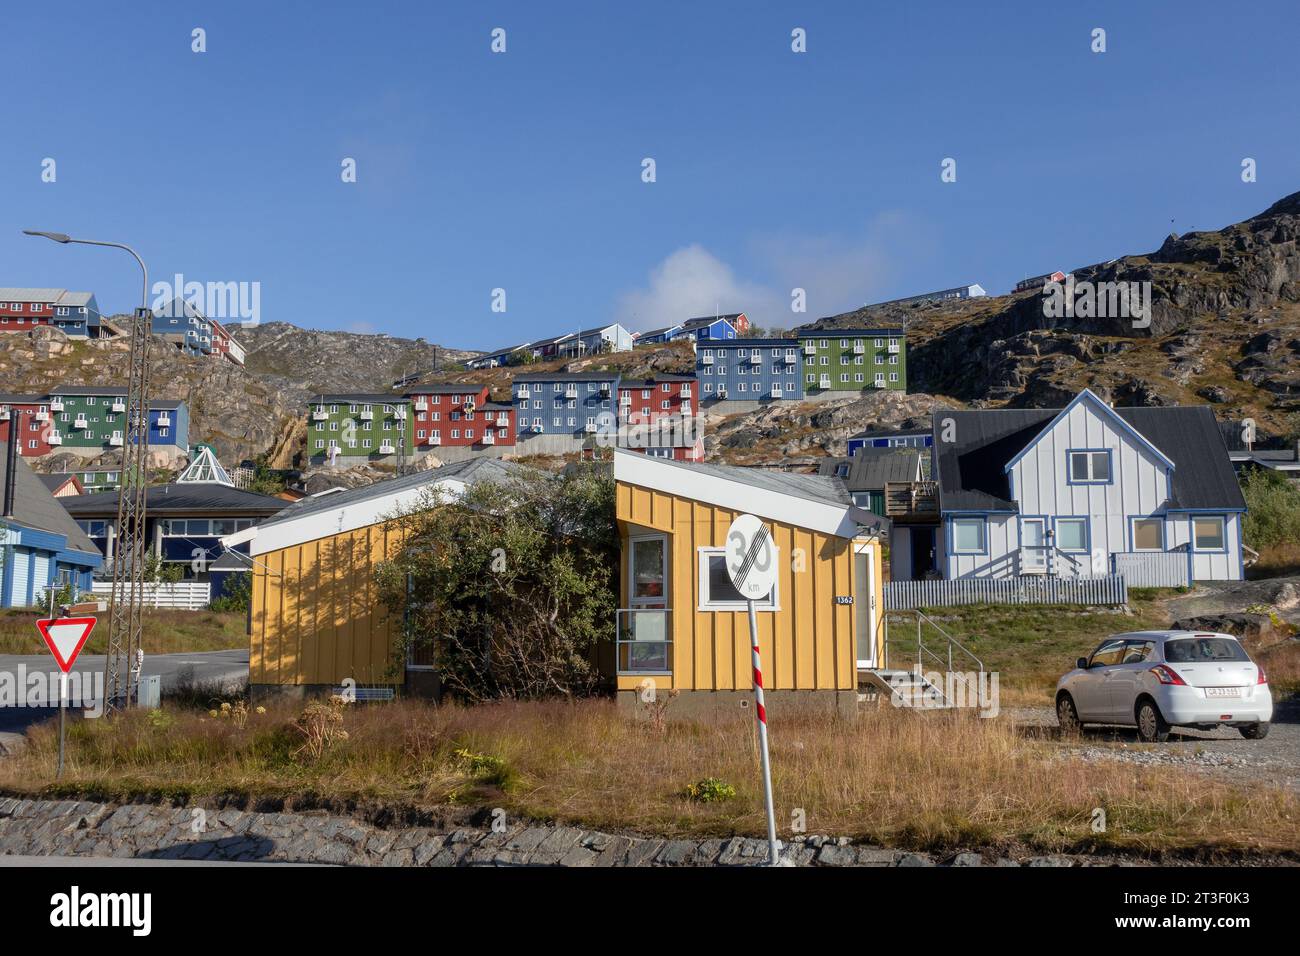 Traditional Colourful Greenland House In The Town Of Qaqortoq Greenland, In The Early Morning Stock Photo